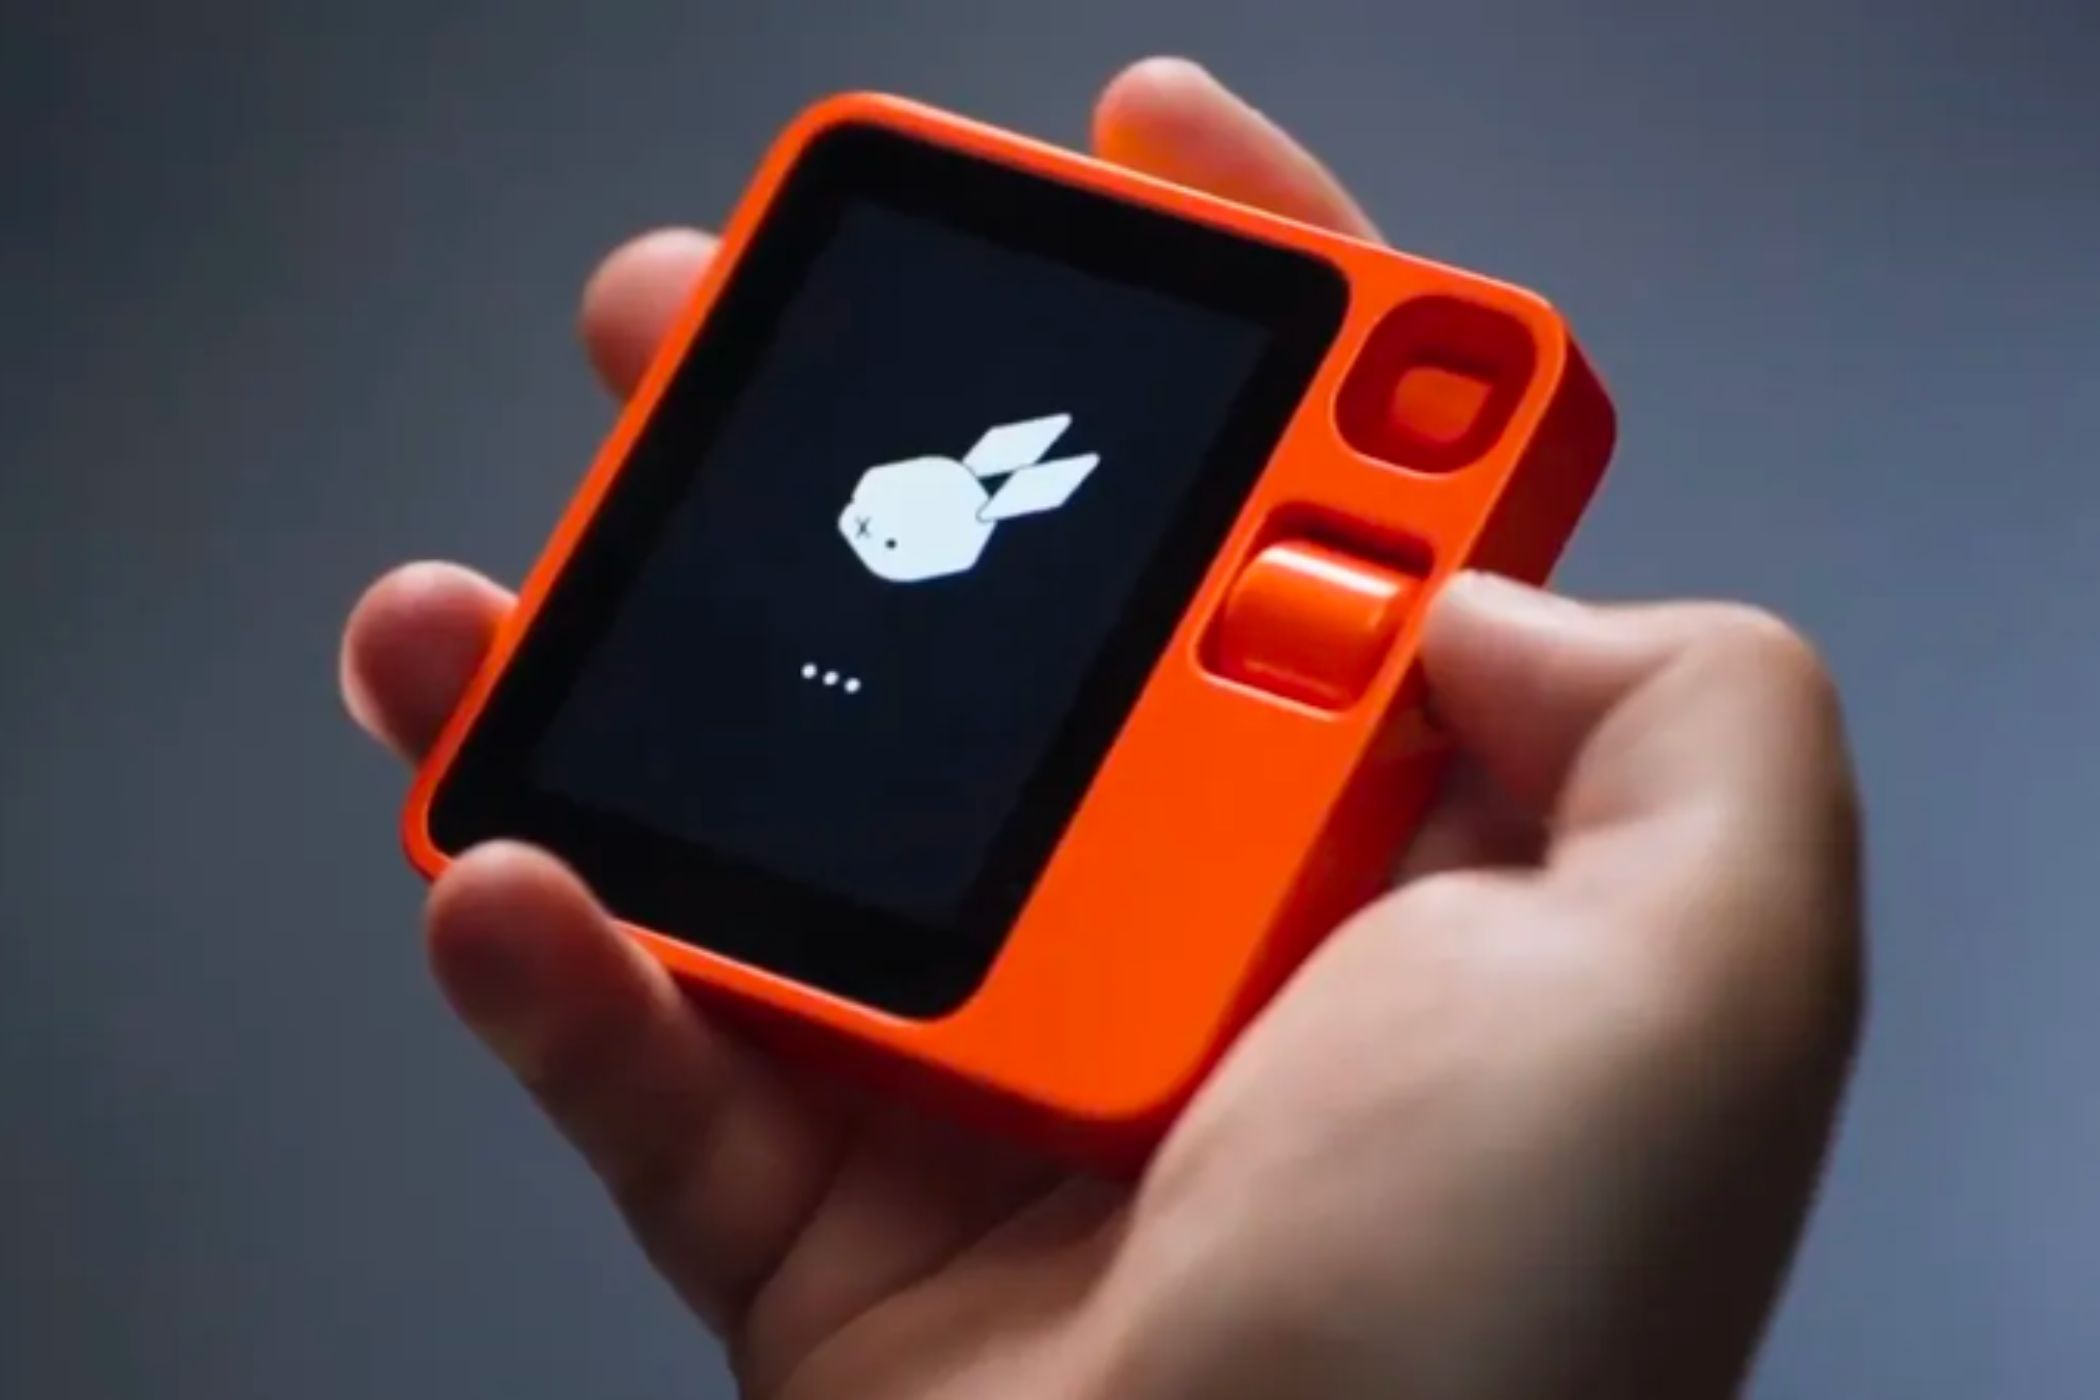 The R1 Rabbit companion device held in a hand, showing the Rabbit icon on its screen.